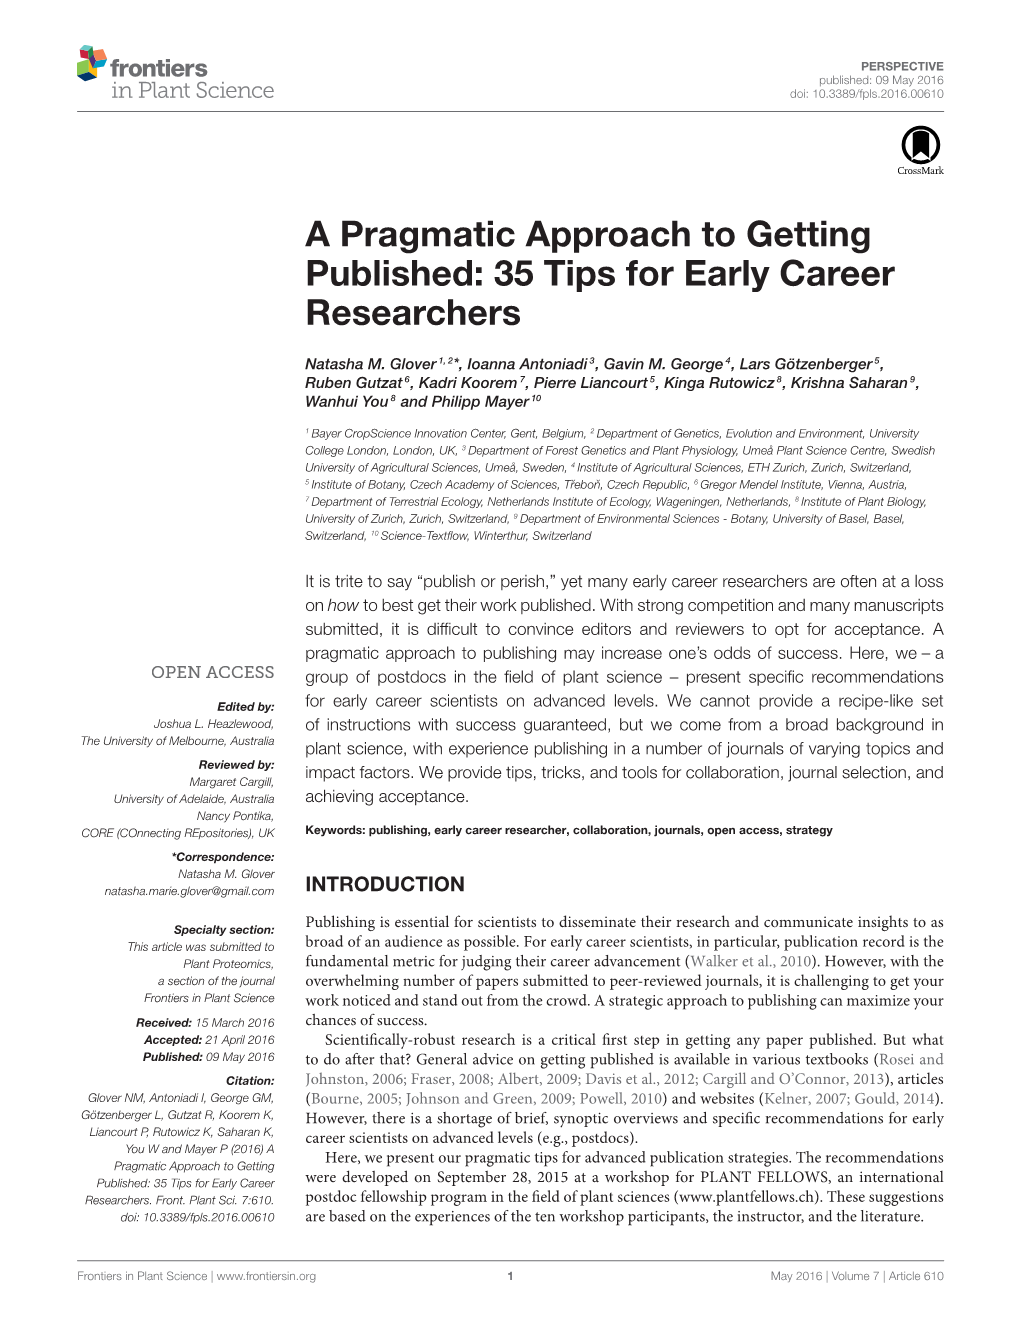 A Pragmatic Approach to Getting Published: 35 Tips for Early Career Researchers